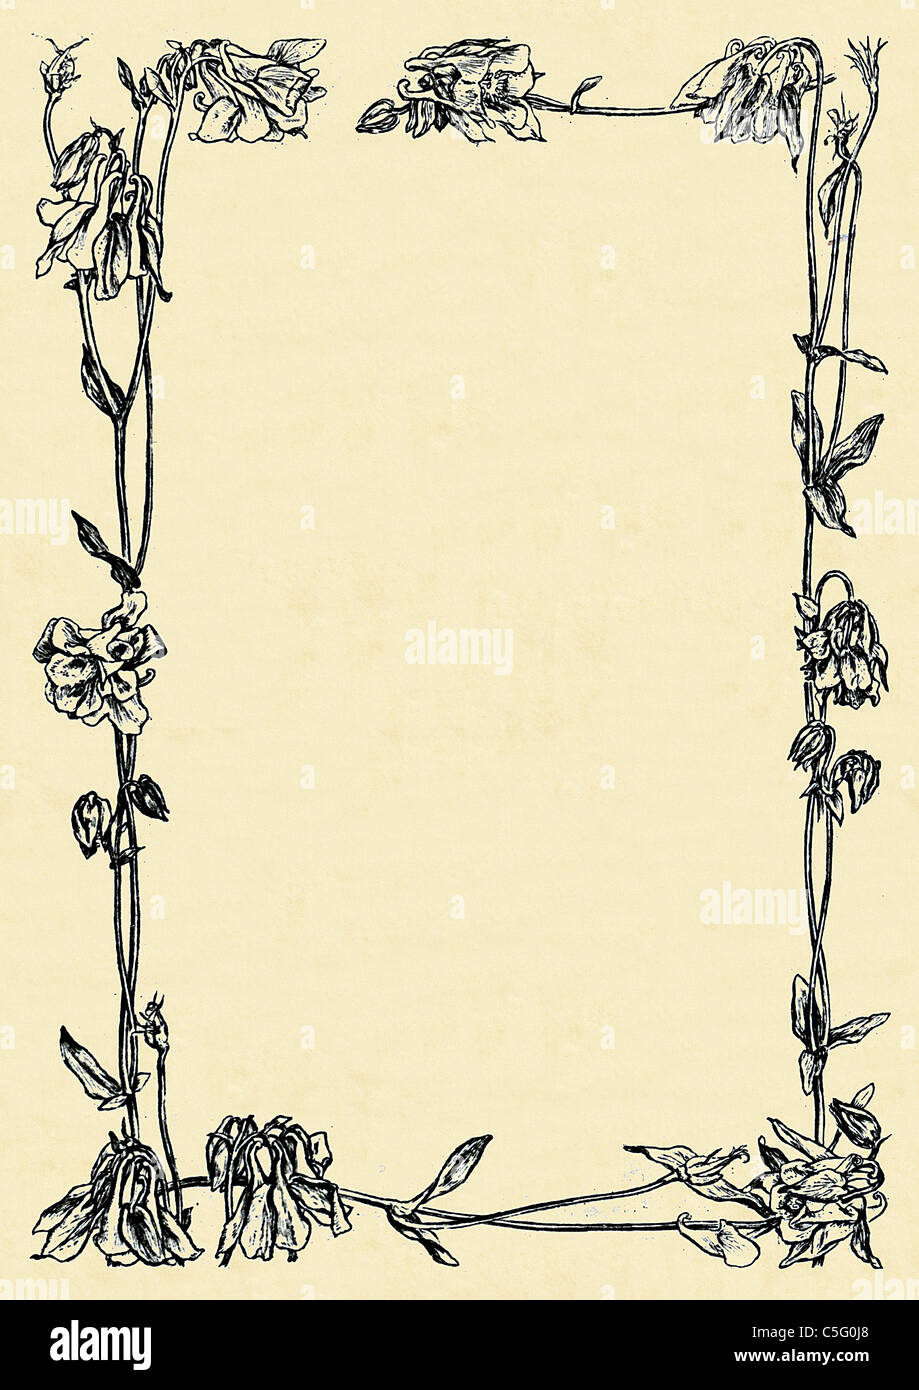 Vintage Decorative Border Design #4 from an antiquarian book ...